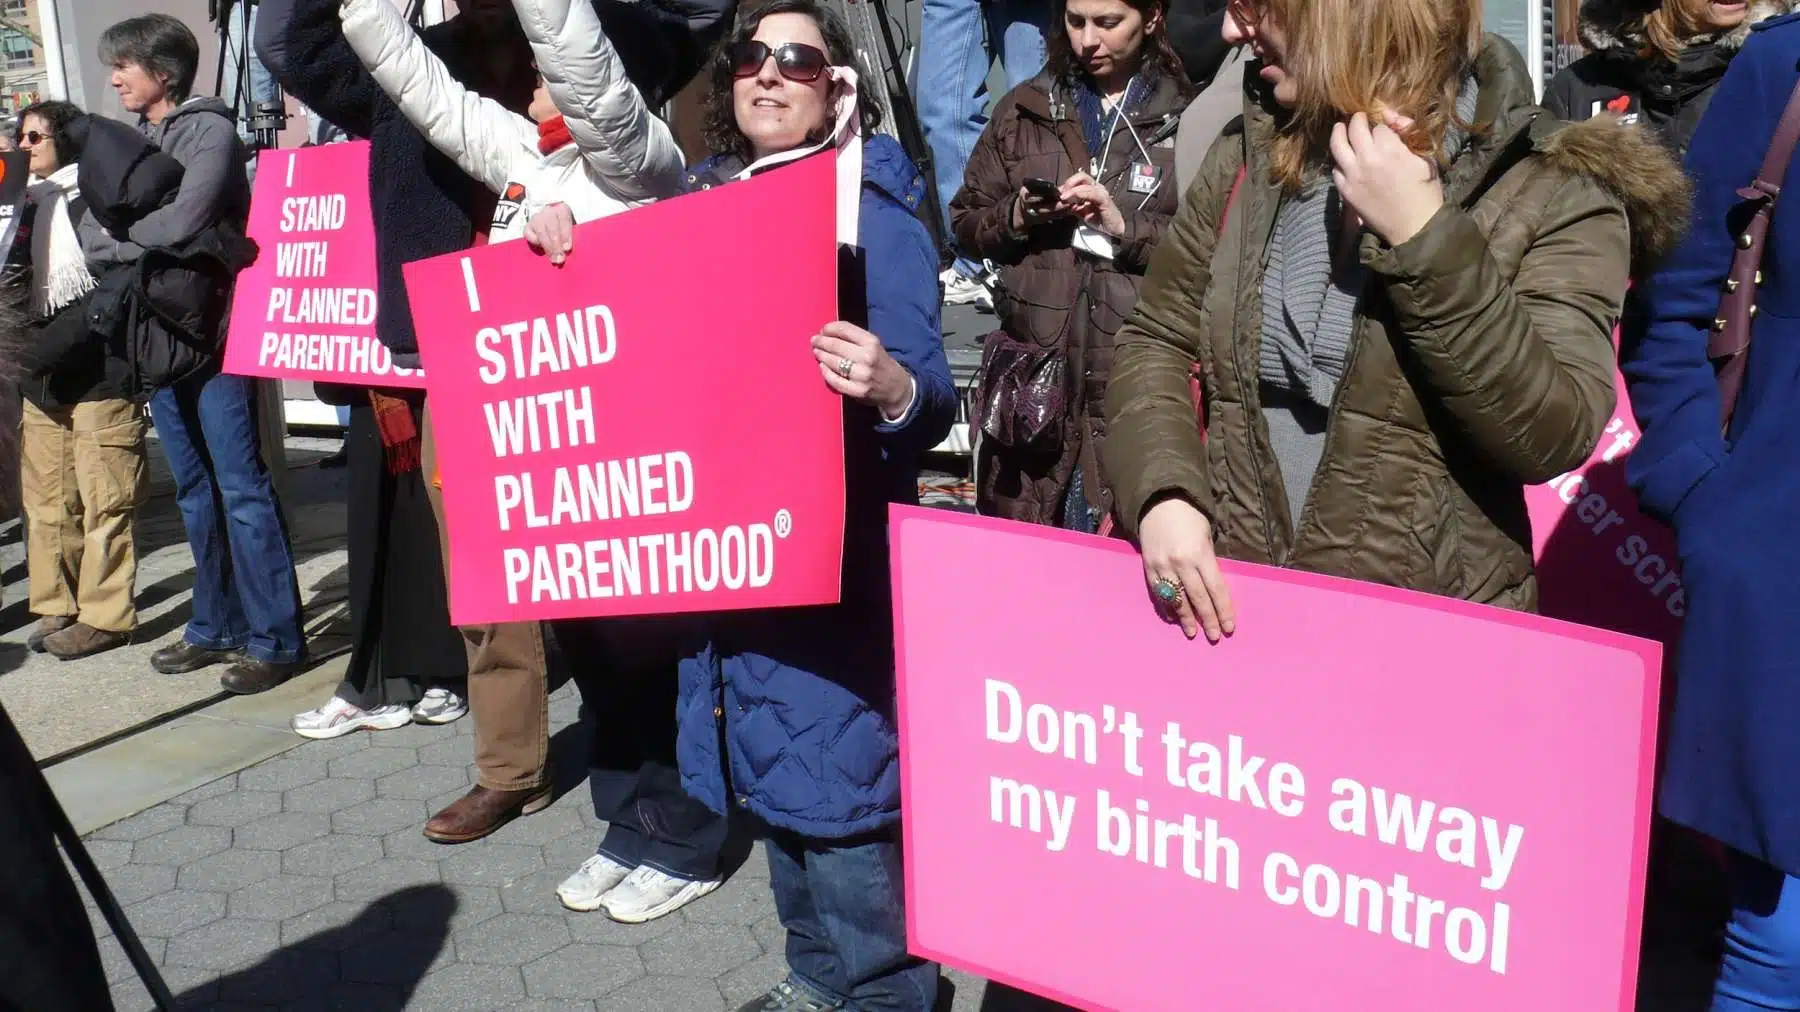 Rhode Island News: During pandemic, Planned Parenthood of SNE’s doors stay open; Telehealth launched